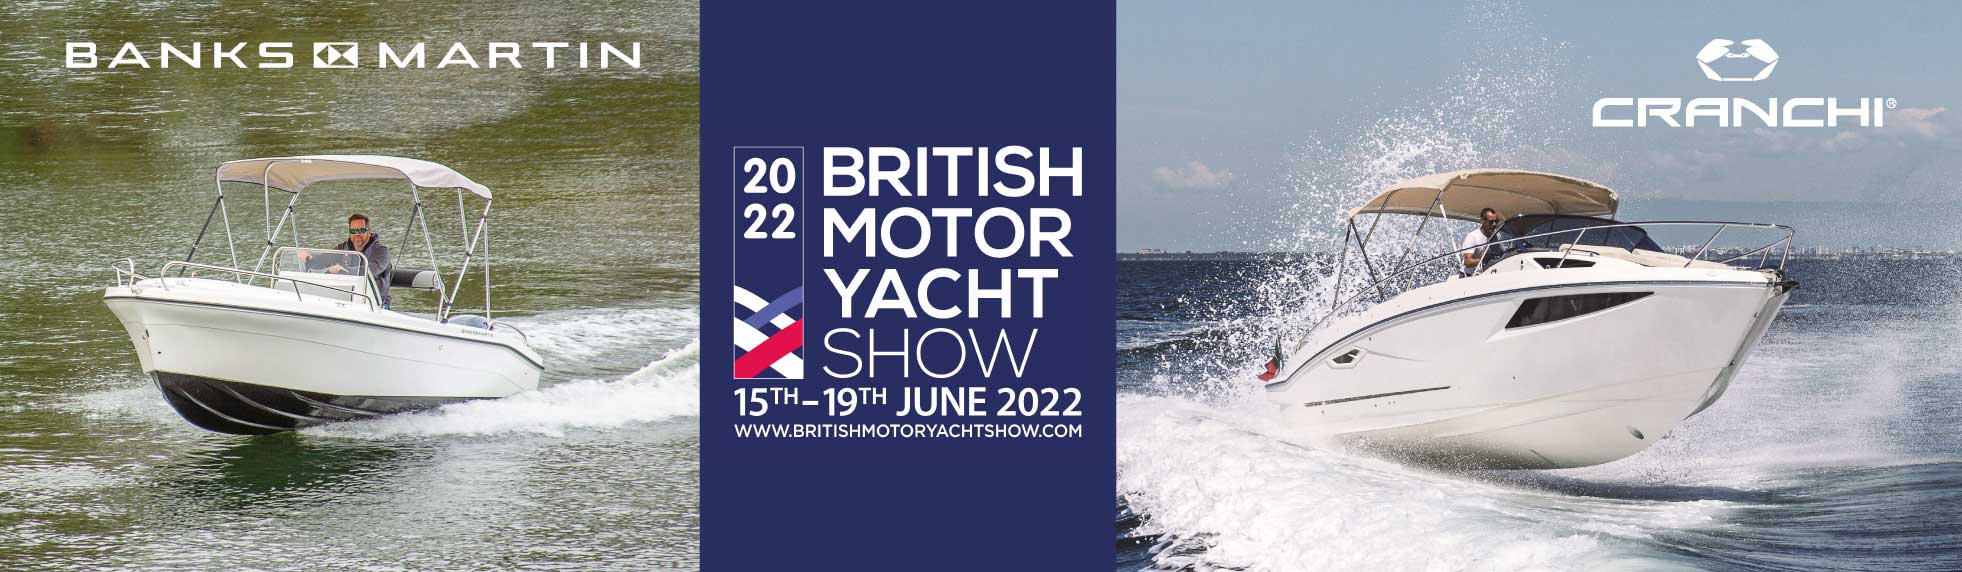 Cranchi Endurance 30 and Banks Martin 5 Offshore with British Motor Yacht Show logo